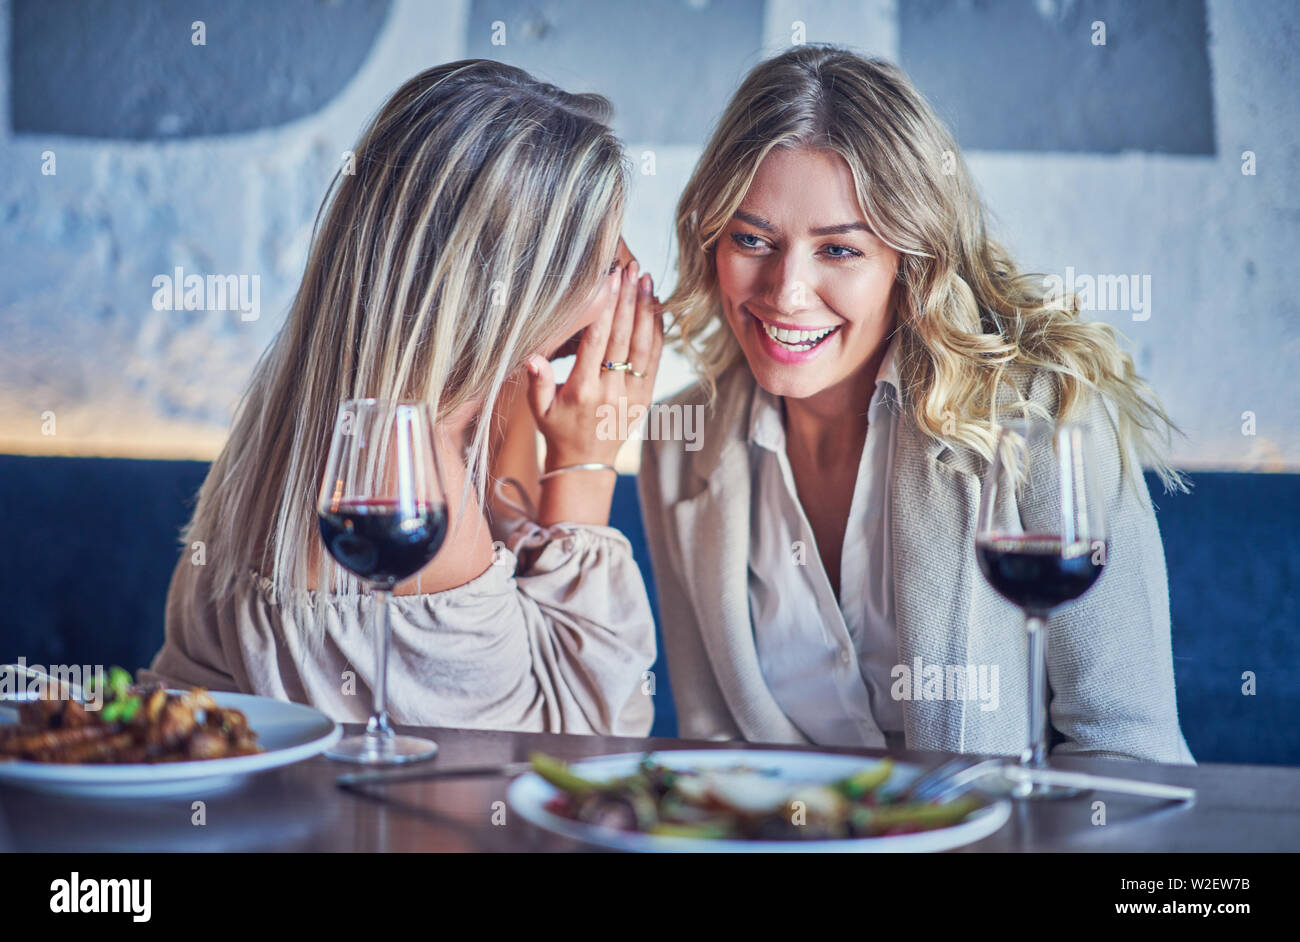 Two girl friends eating lunch in restaurant Stock Photo